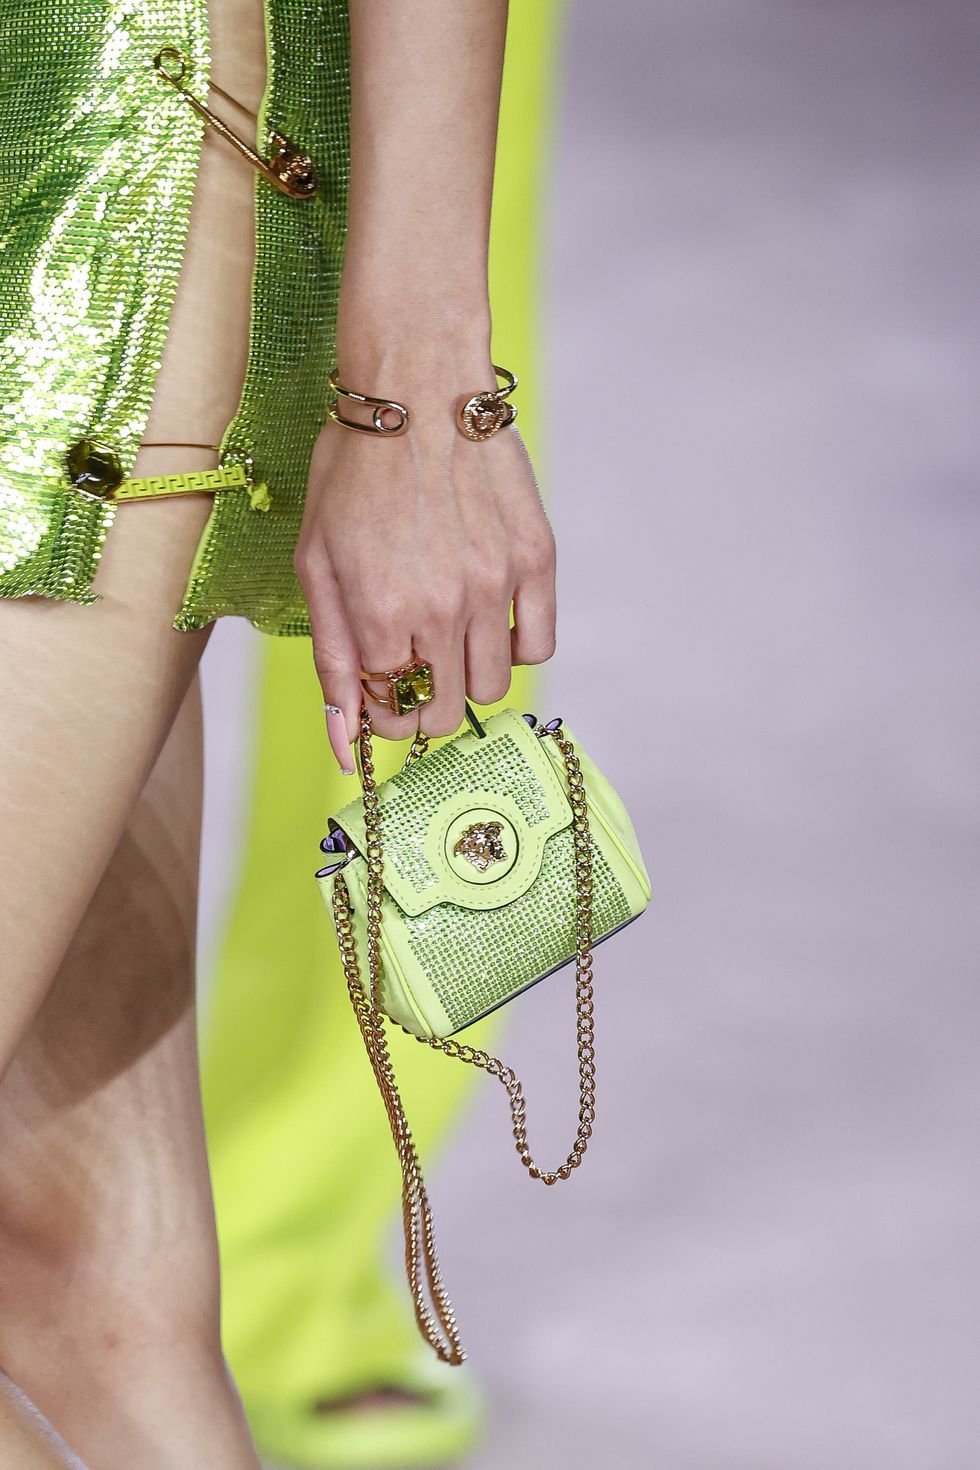 Fashion's Most Outrageous Handbags of 2022